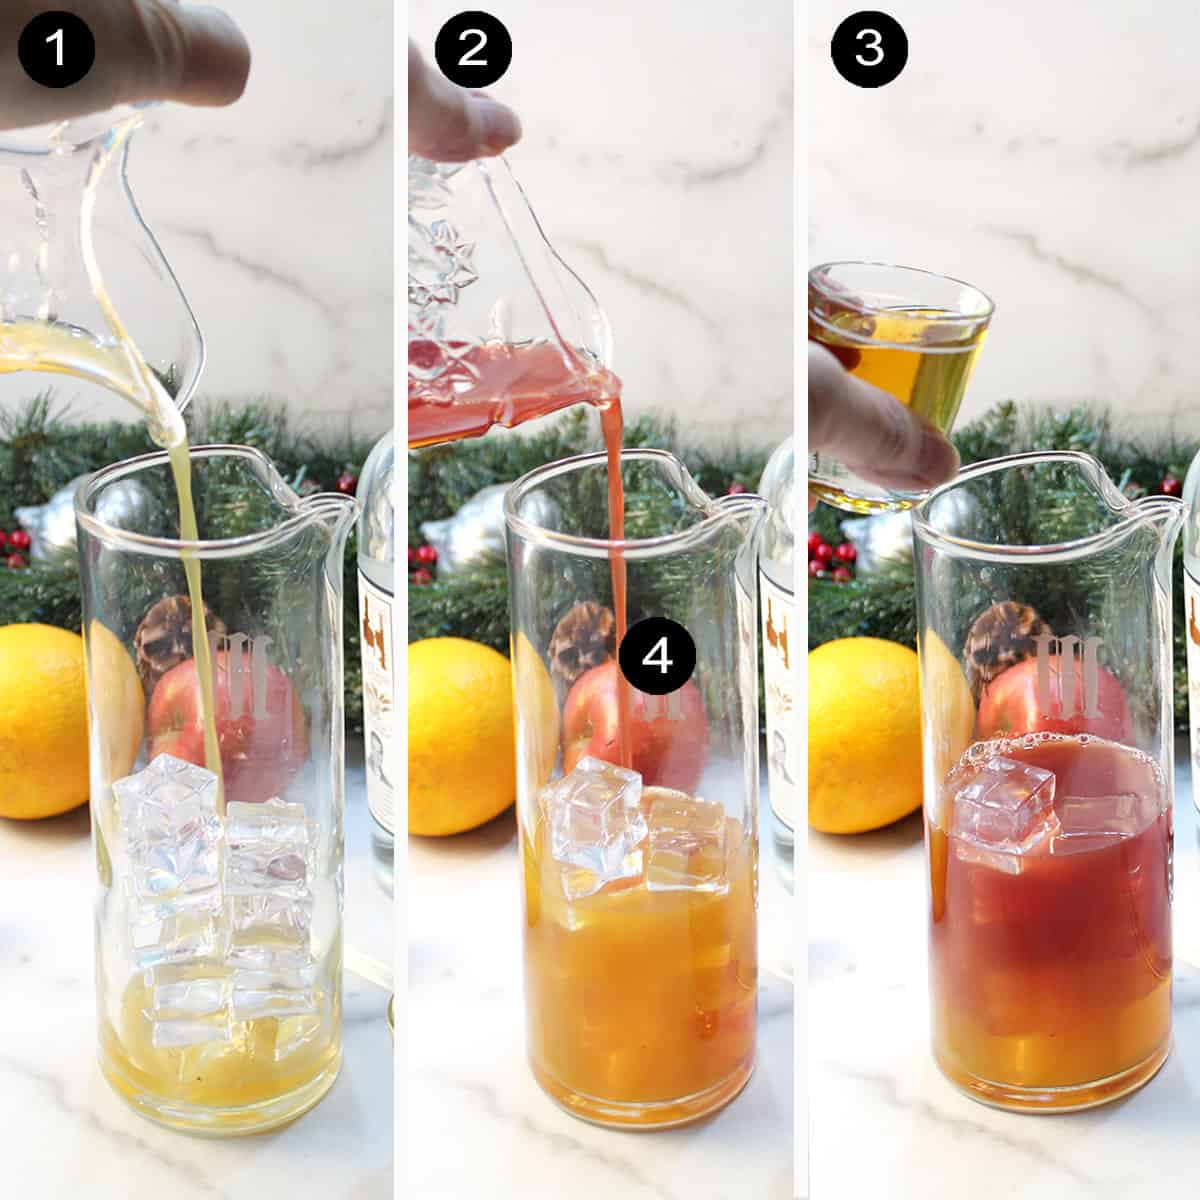 Mixing cocktail steps 1 to 3.